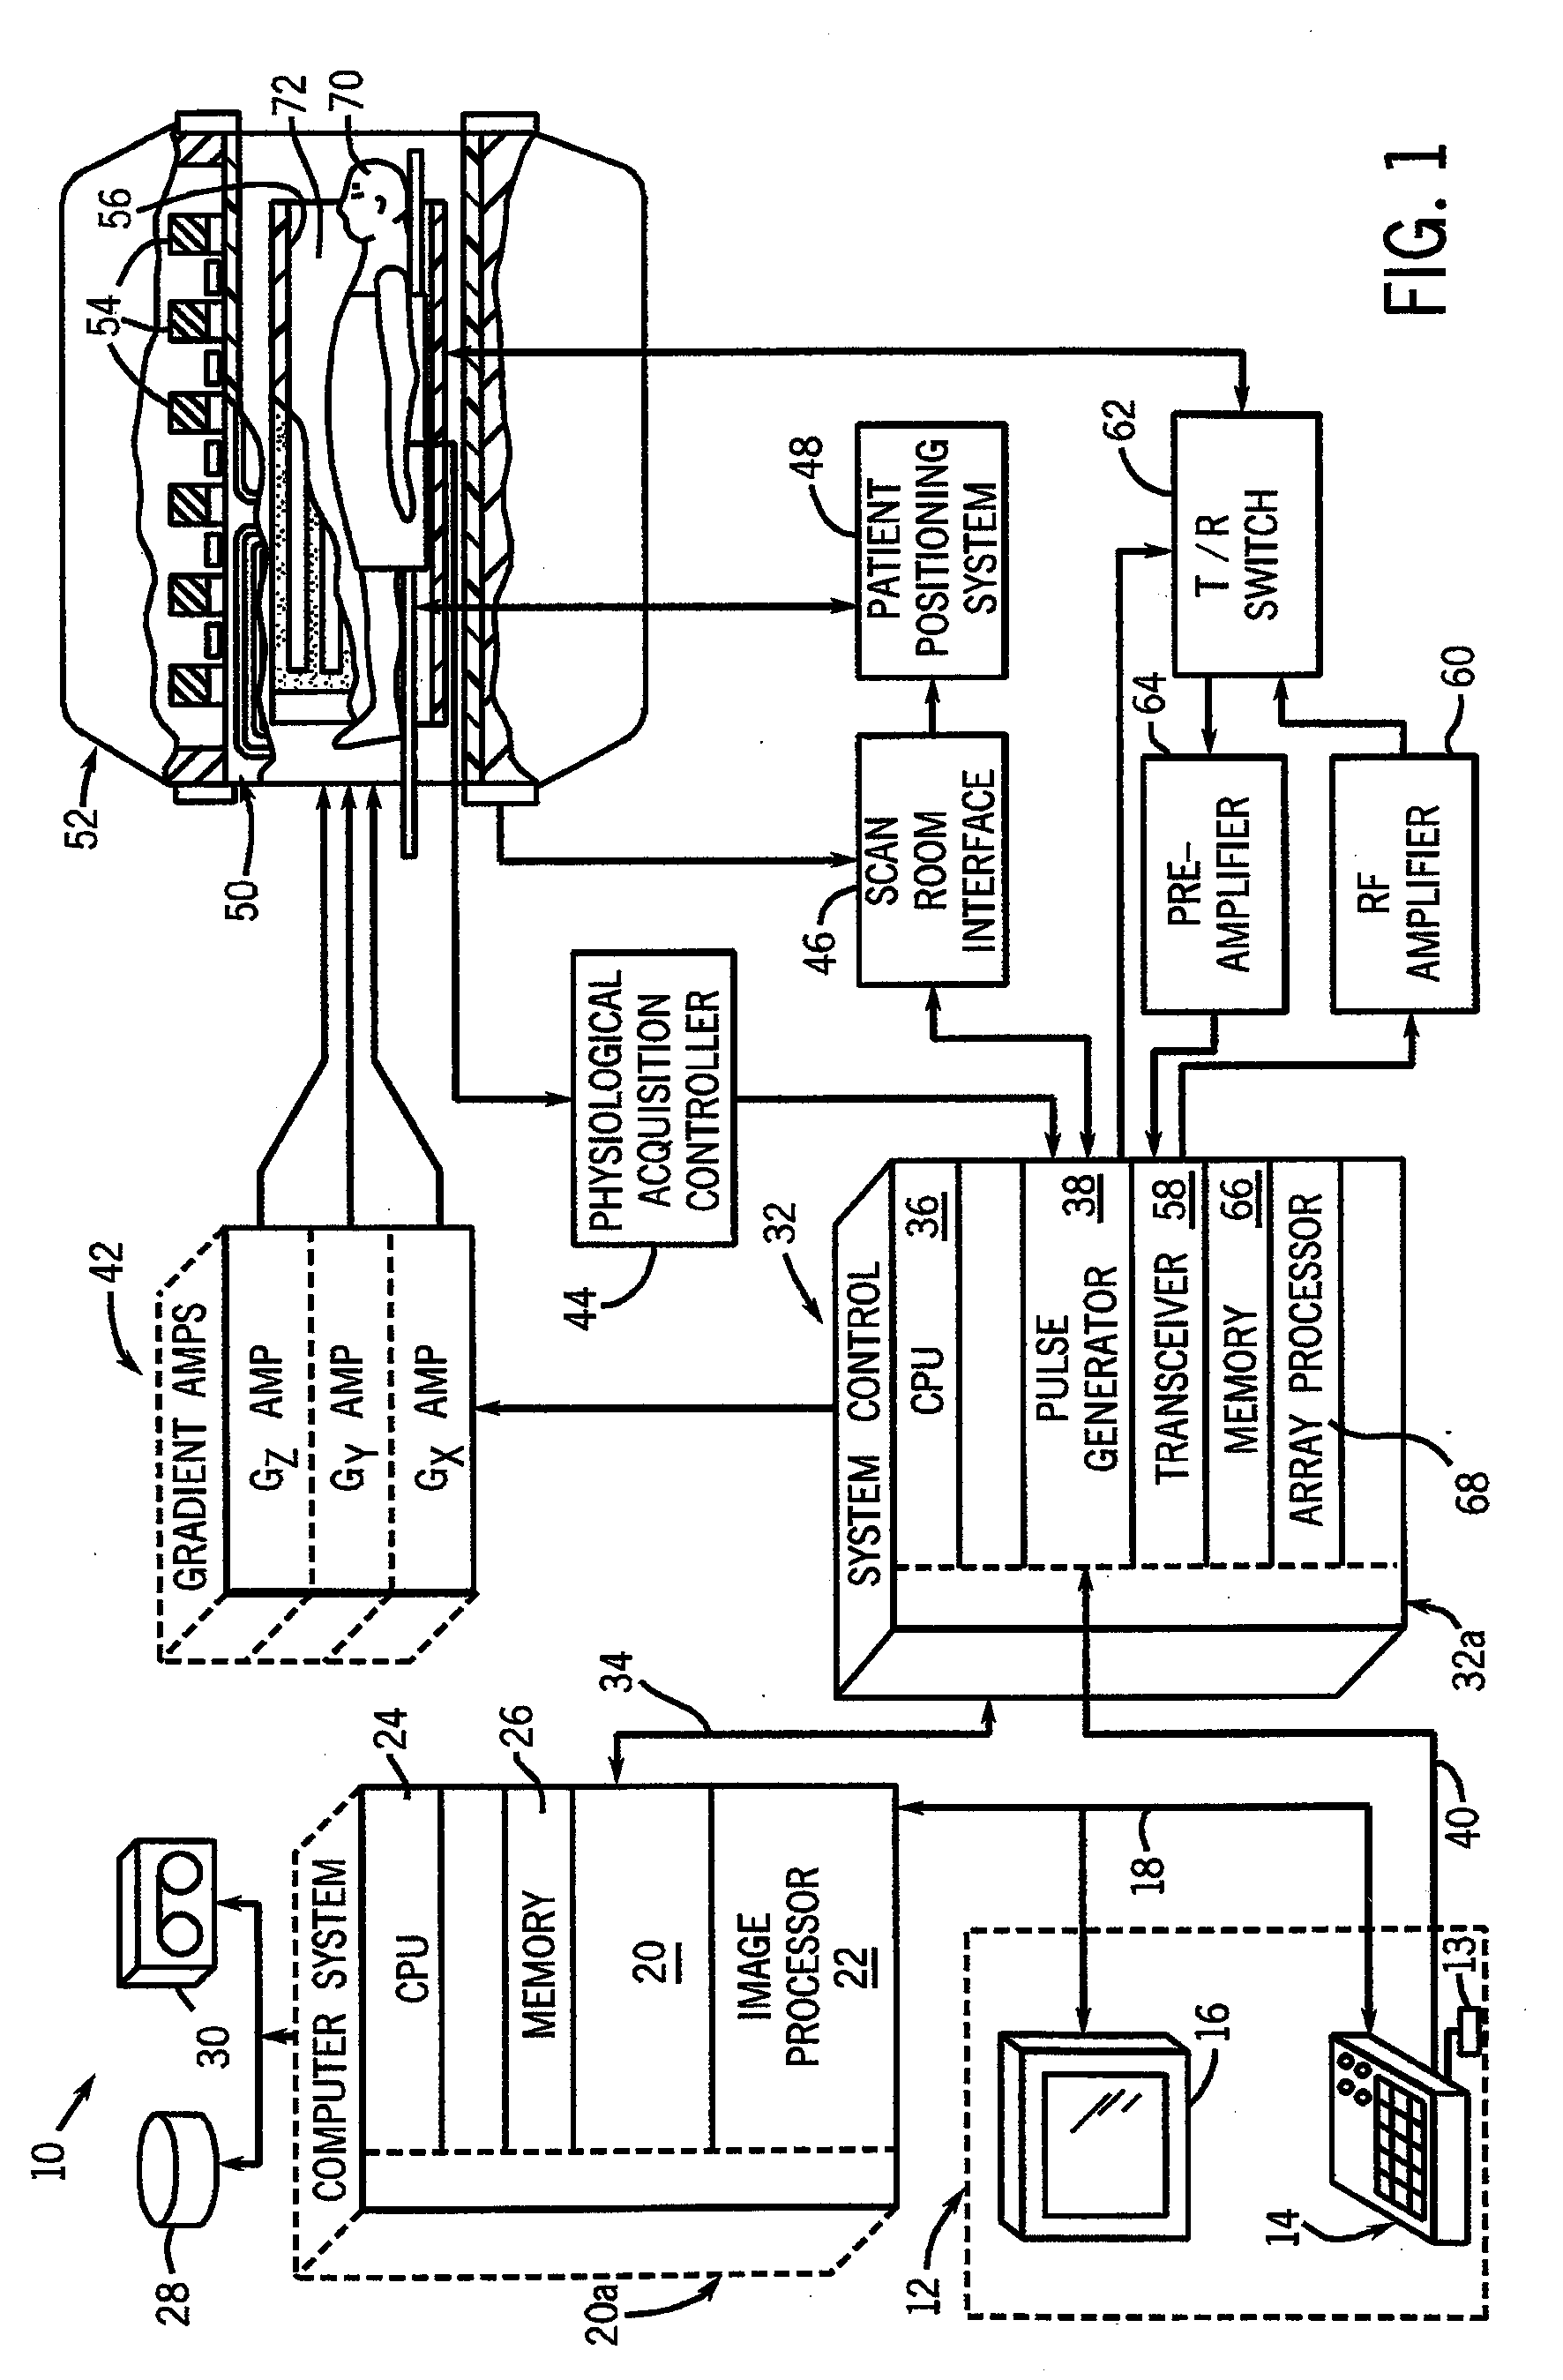 Method and apparatus for generating a flip angle schedule for a spin echo train pulse sequence